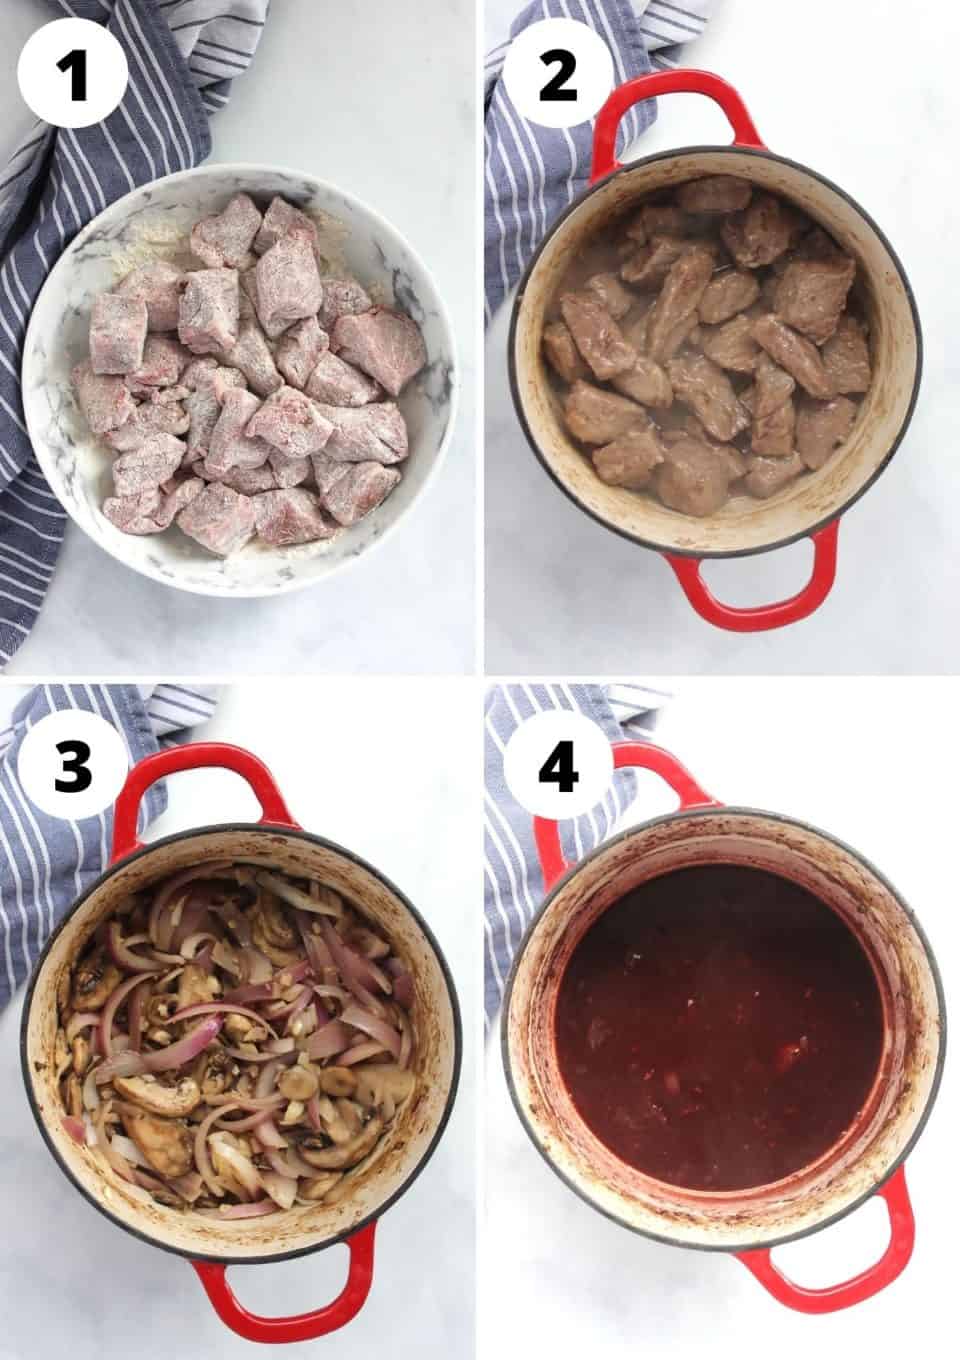 Four step by step photos to show how to make the pie filling.